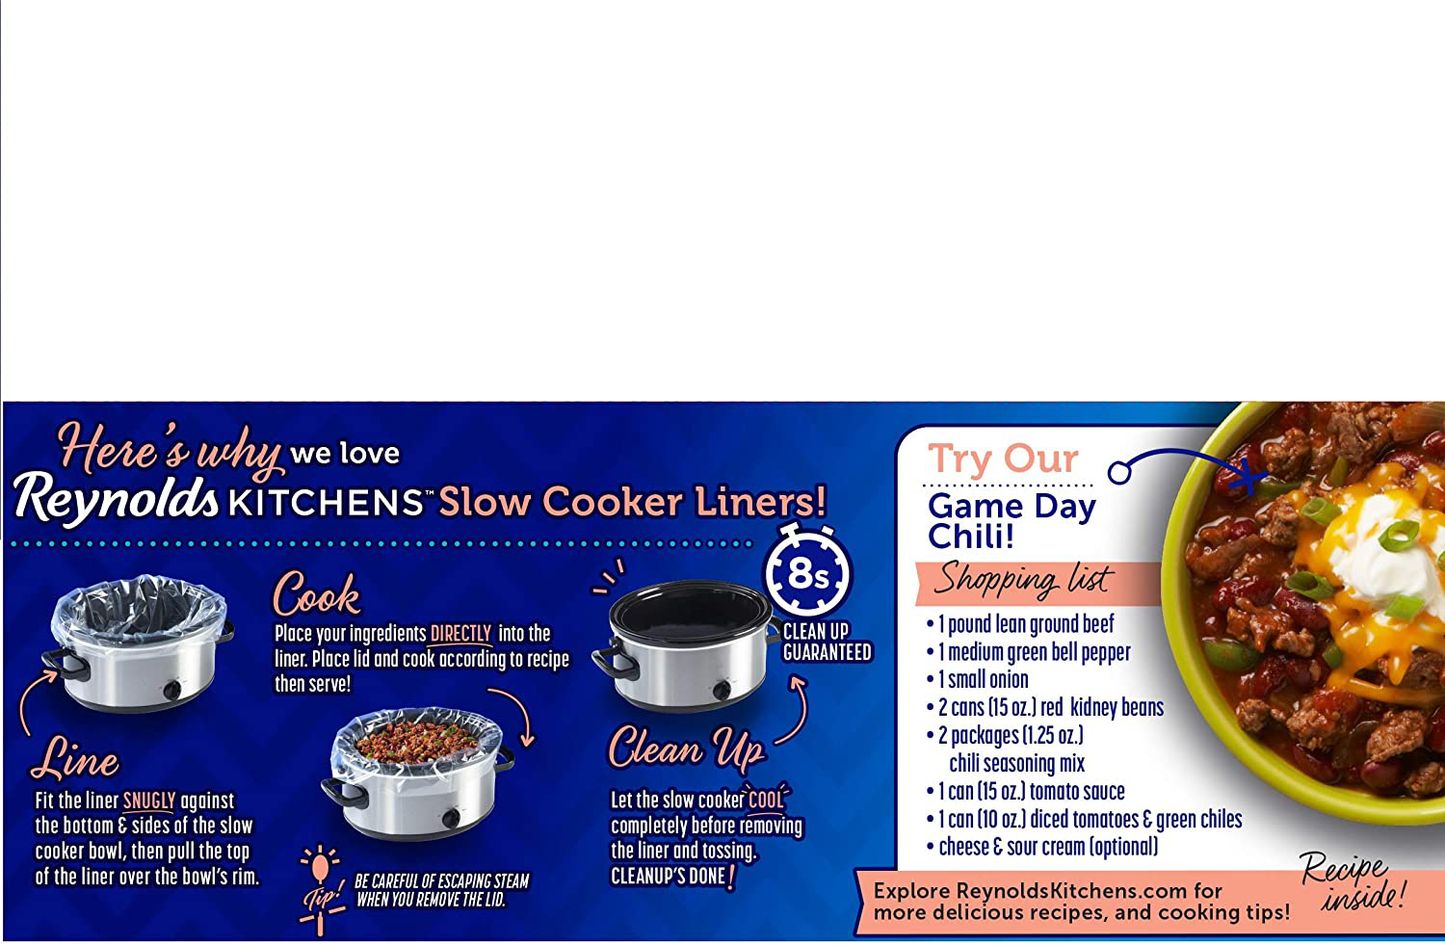 Reynolds Kitchens Slow Cooker Liners Regular Size 6 Count (Pack of 1)